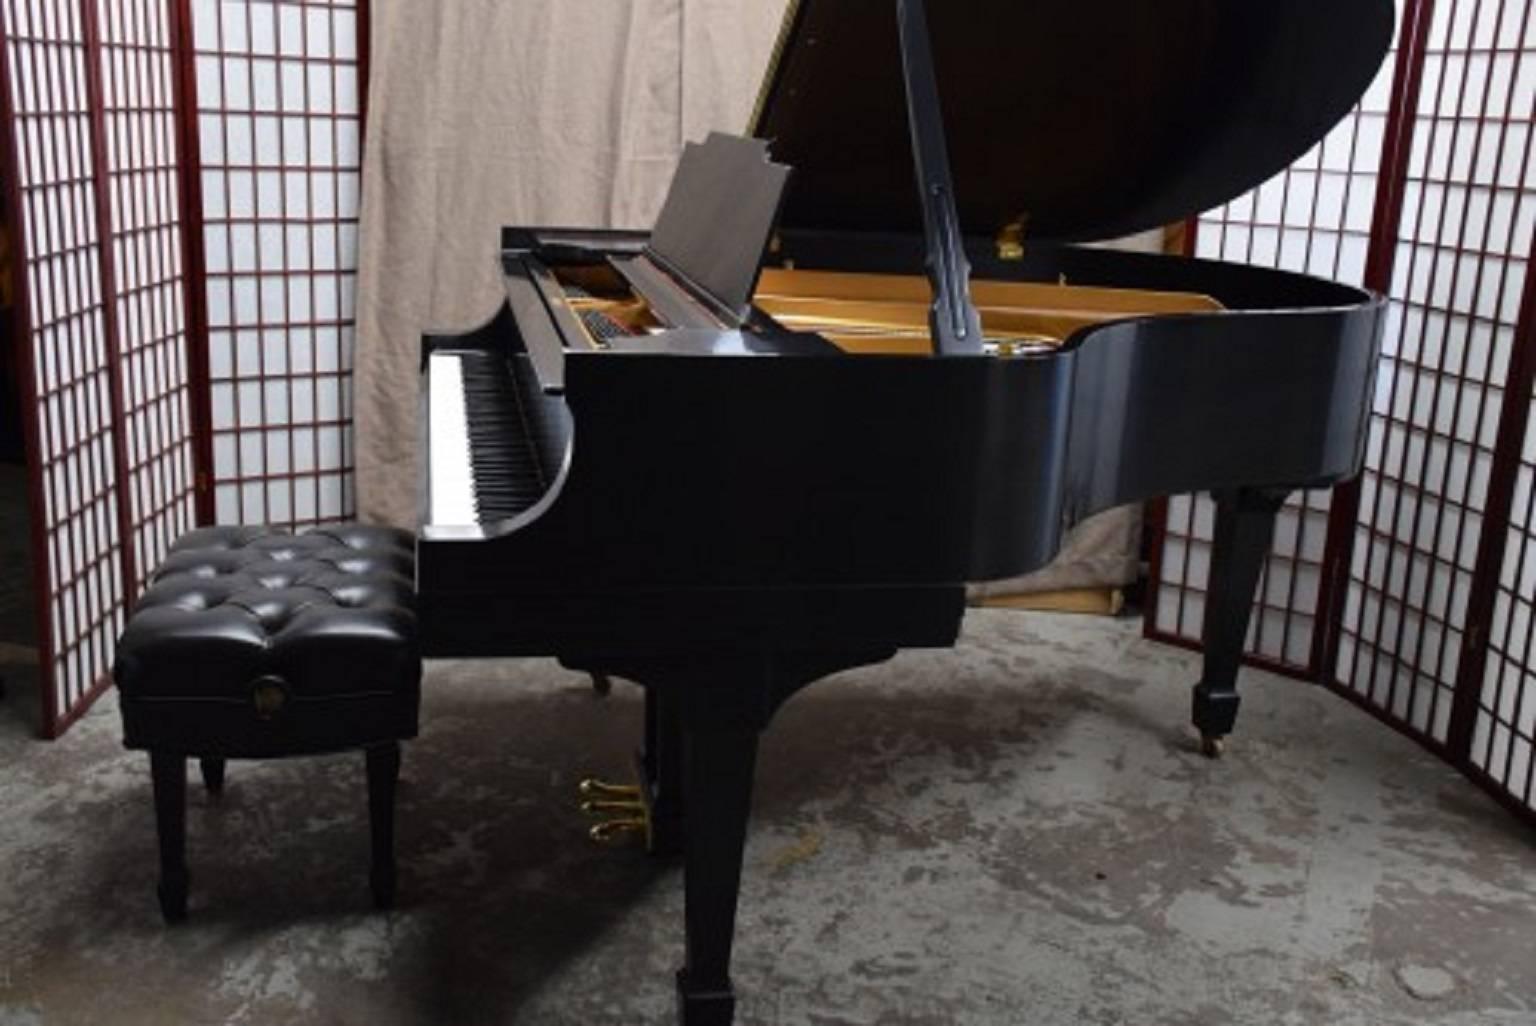 See and hear more about this magnificent piano on the video at the bottom of Sonny's Luxury Art case piano storefront homepage. 

Exquisite looking and sublime sounding Steinway M made in the Steinway NYC Factory in 1923 during the "Golden